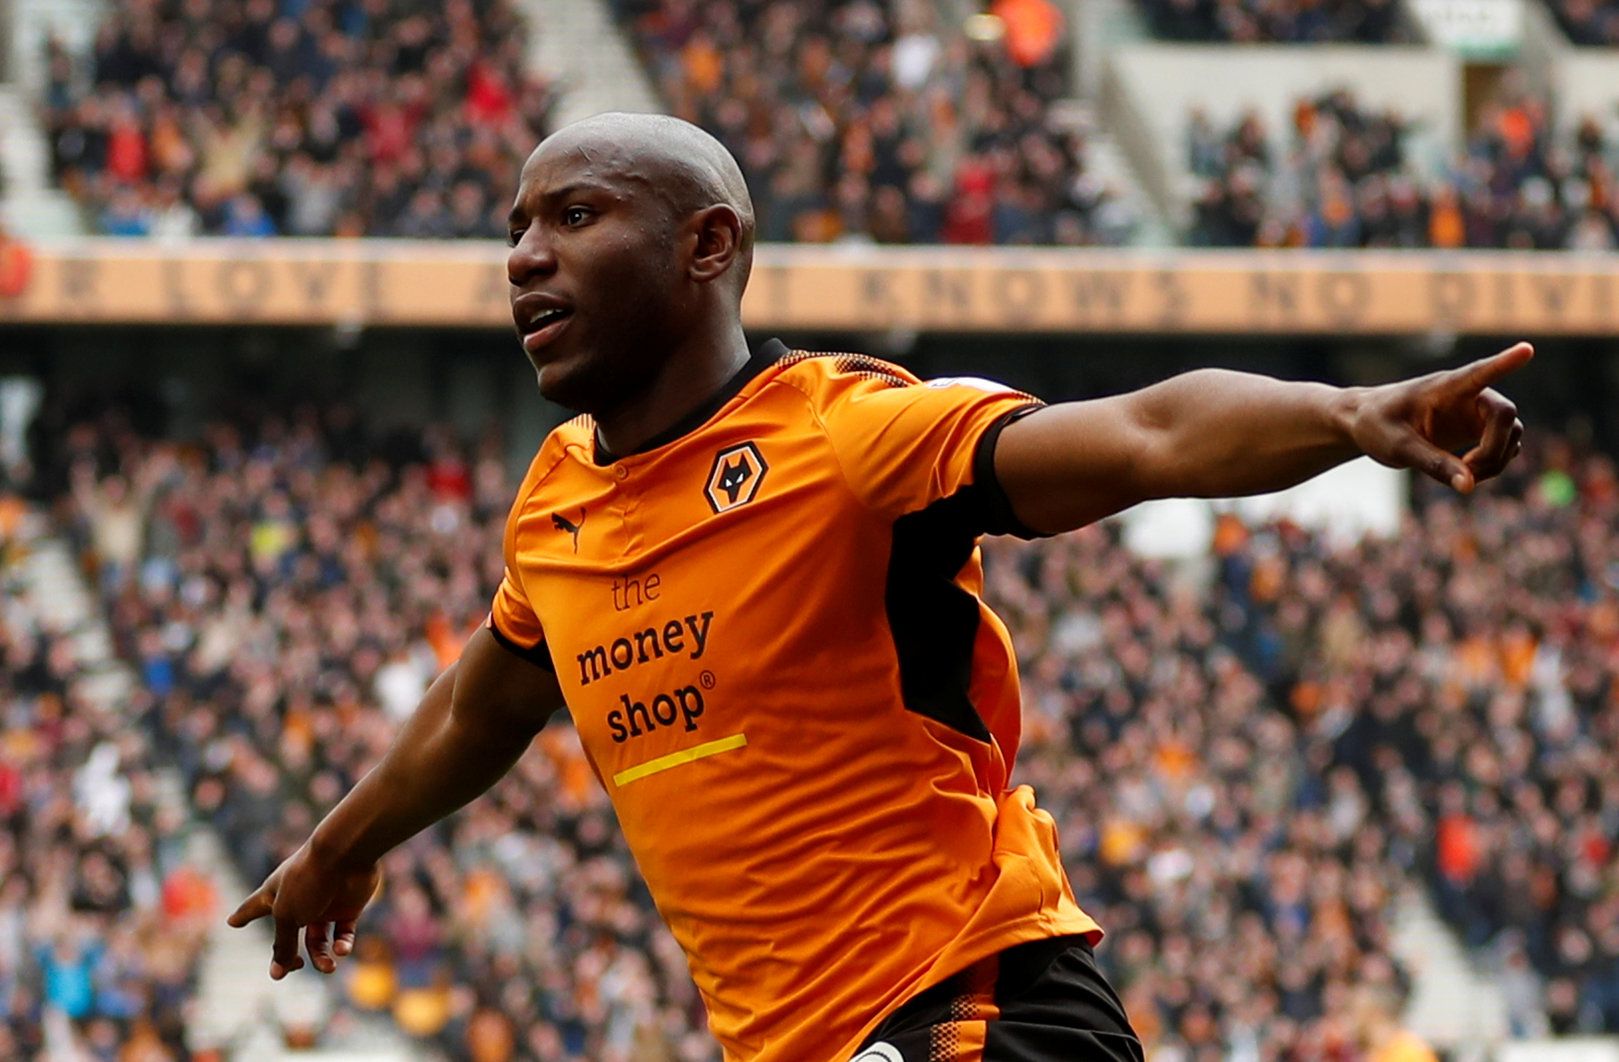 Soccer Football - Championship - Wolverhampton Wanderers vs Birmingham City - Molineux Stadium, Wolverhampton, Britain - April 15, 2018   Wolverhampton Wanderers' Benik Afobe celebrates scoring their second goal        Action Images via Reuters/Andrew Boyers    EDITORIAL USE ONLY. No use with unauthorized audio, video, data, fixture lists, club/league logos or "live" services. Online in-match use limited to 75 images, no video emulation. No use in betting, games or single club/league/player publ